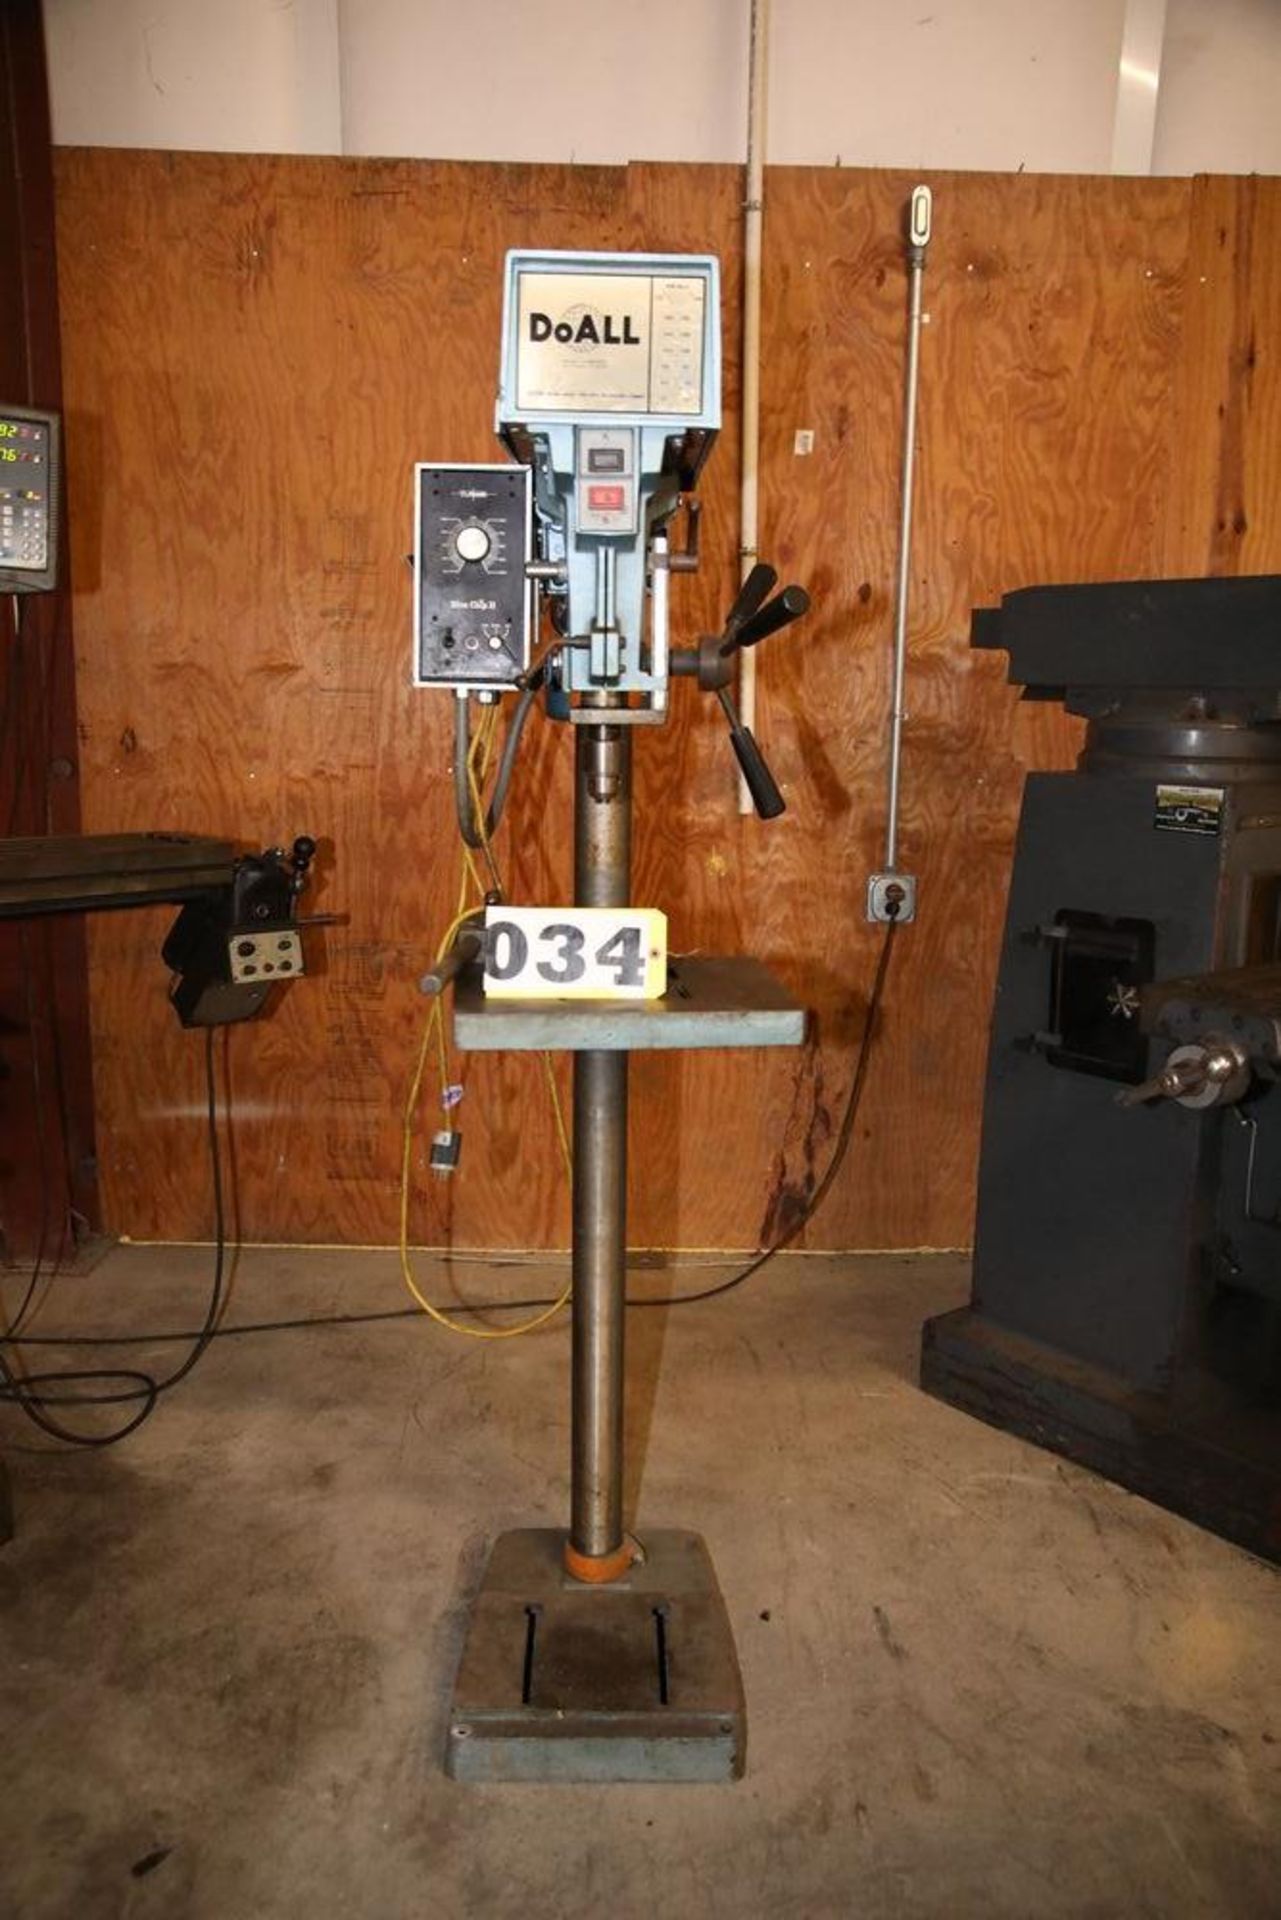 DOALL MODEL 15 VERTICAL DRILL PRESS 250-5000 RPM STEP PULLEY